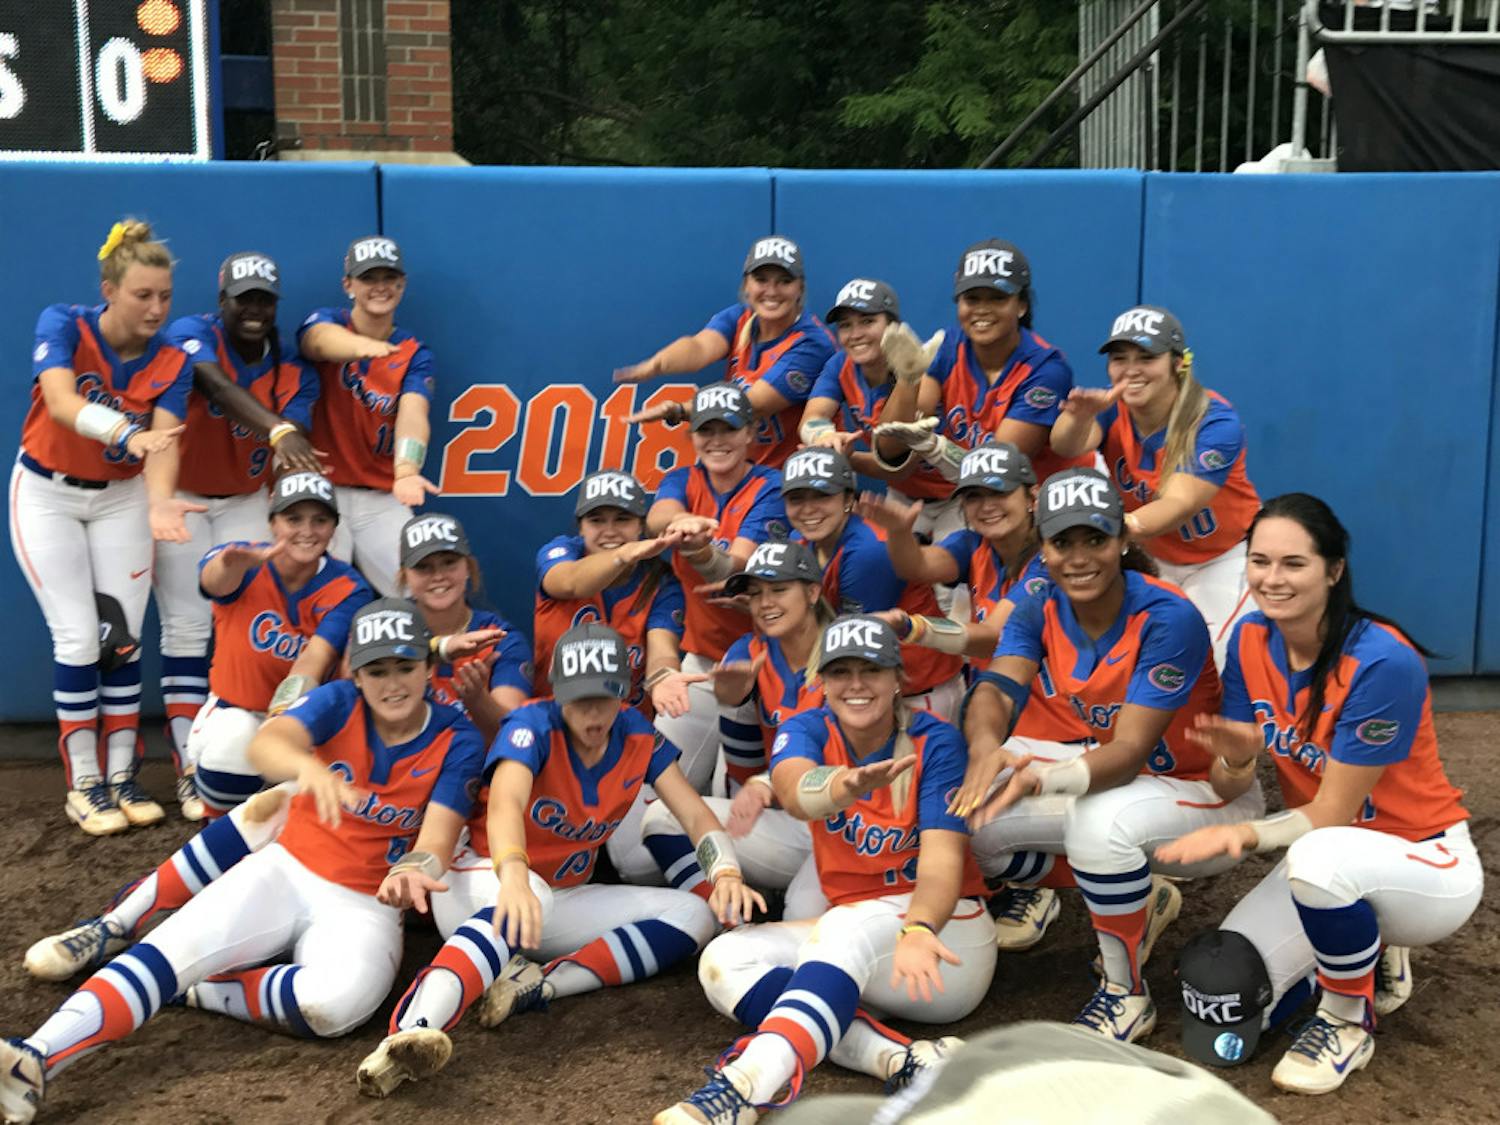 The entire Florida team celebrates after punching its ticket to the Women’s College World Series for the second-consecutive season. The Gators also won the SEC regular-season and tournament titles.